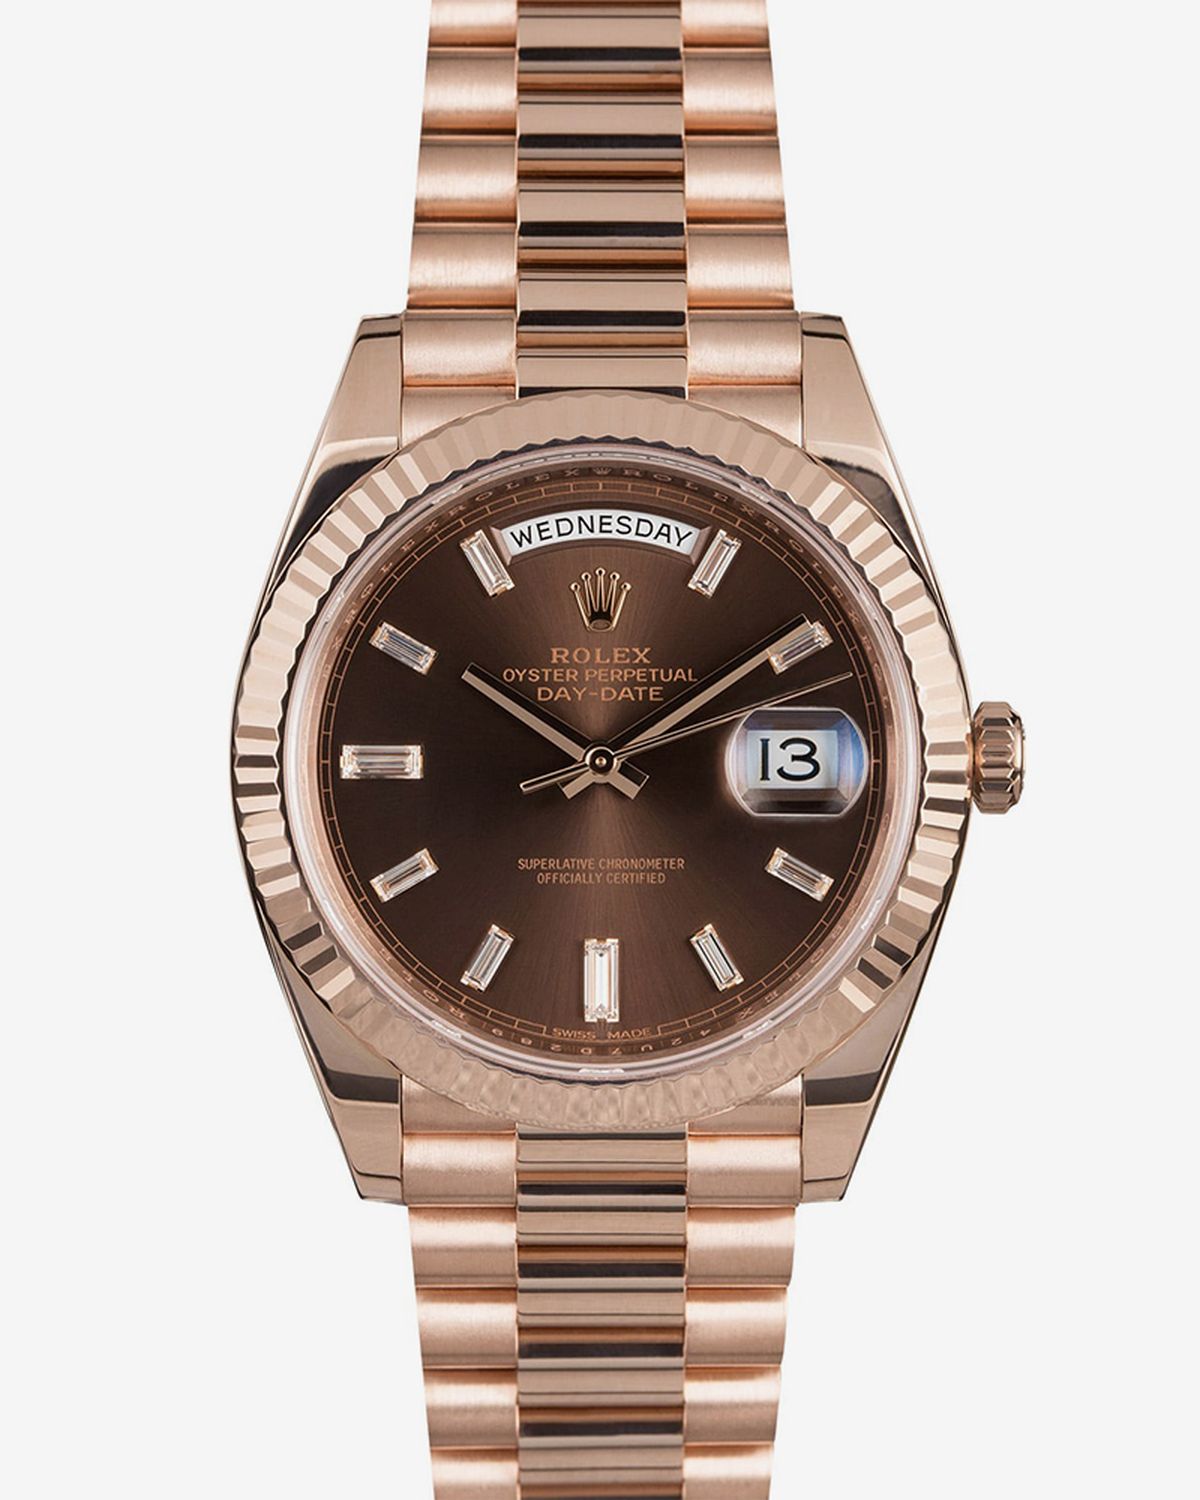 A Guide to the Most Famous Rolex Watches With Slang Names